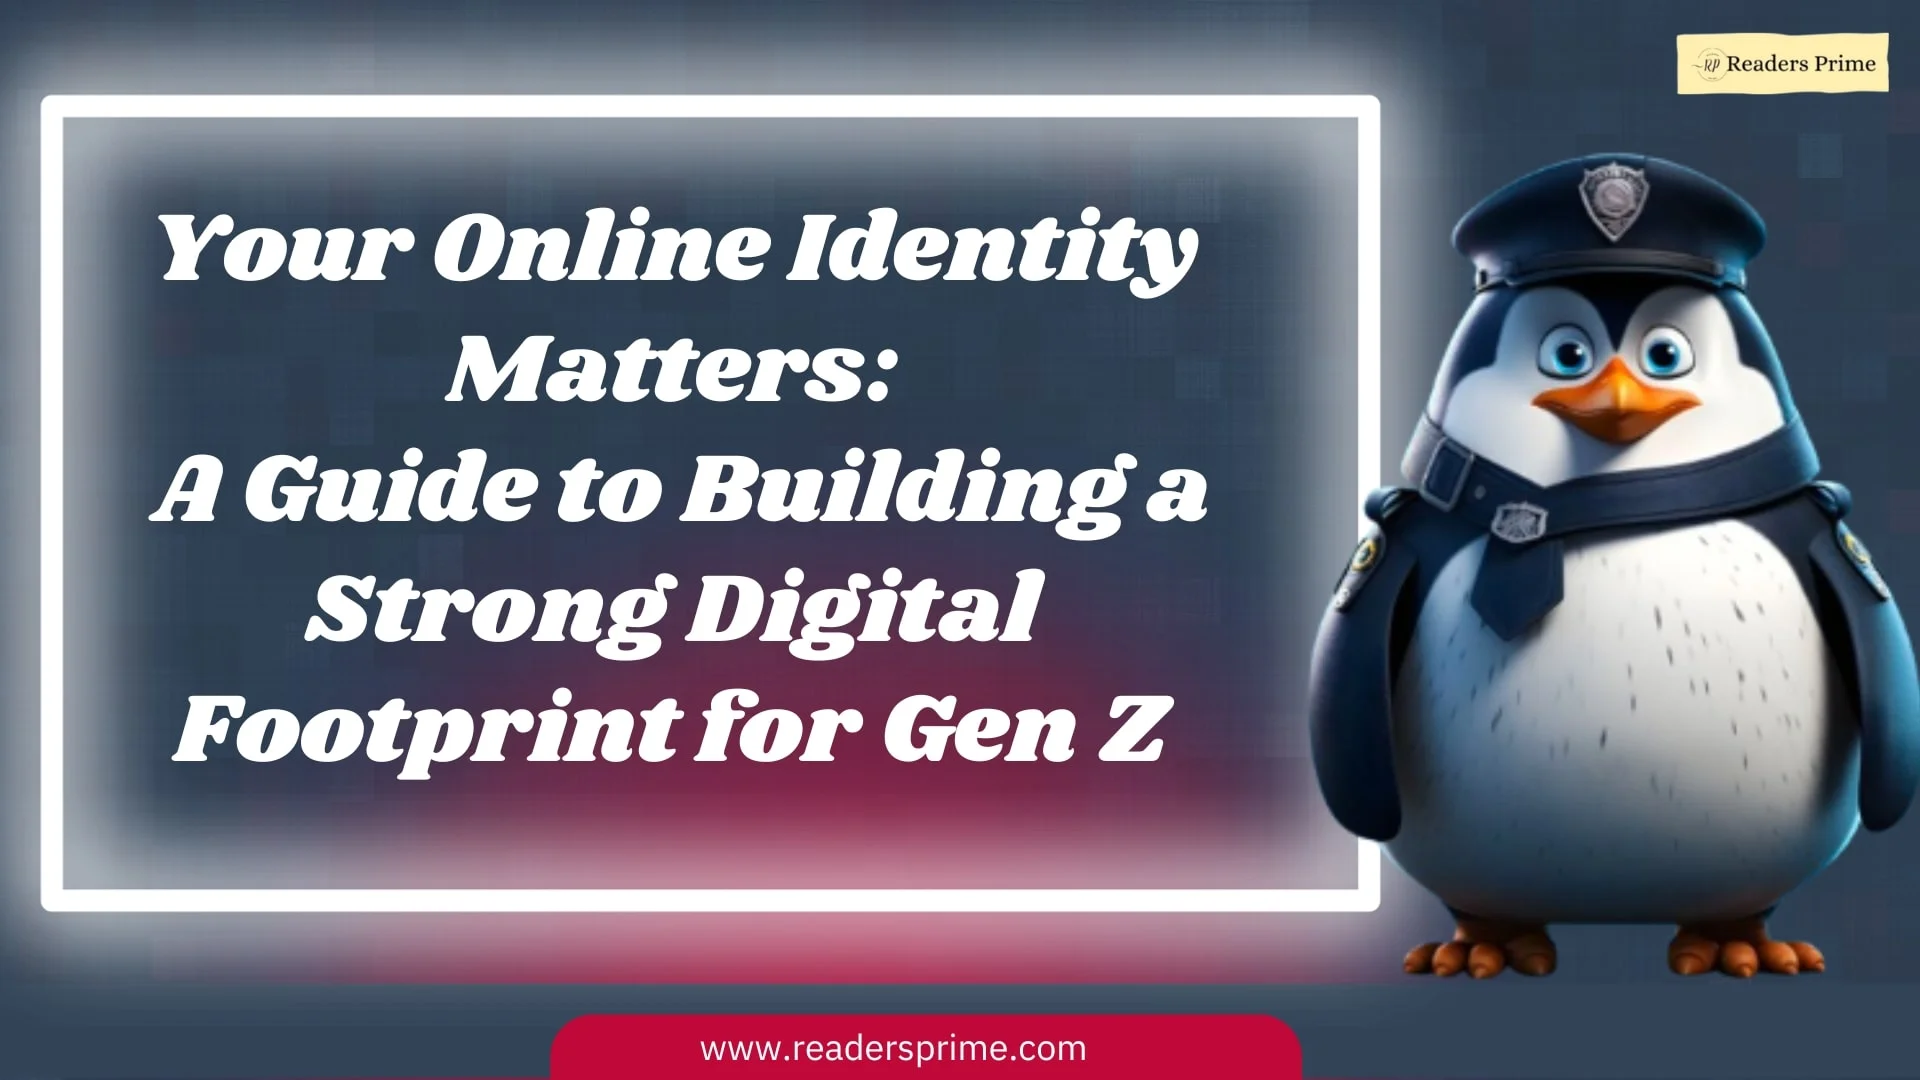 A Guide to Building a Strong Digital Footprint for Gen Z